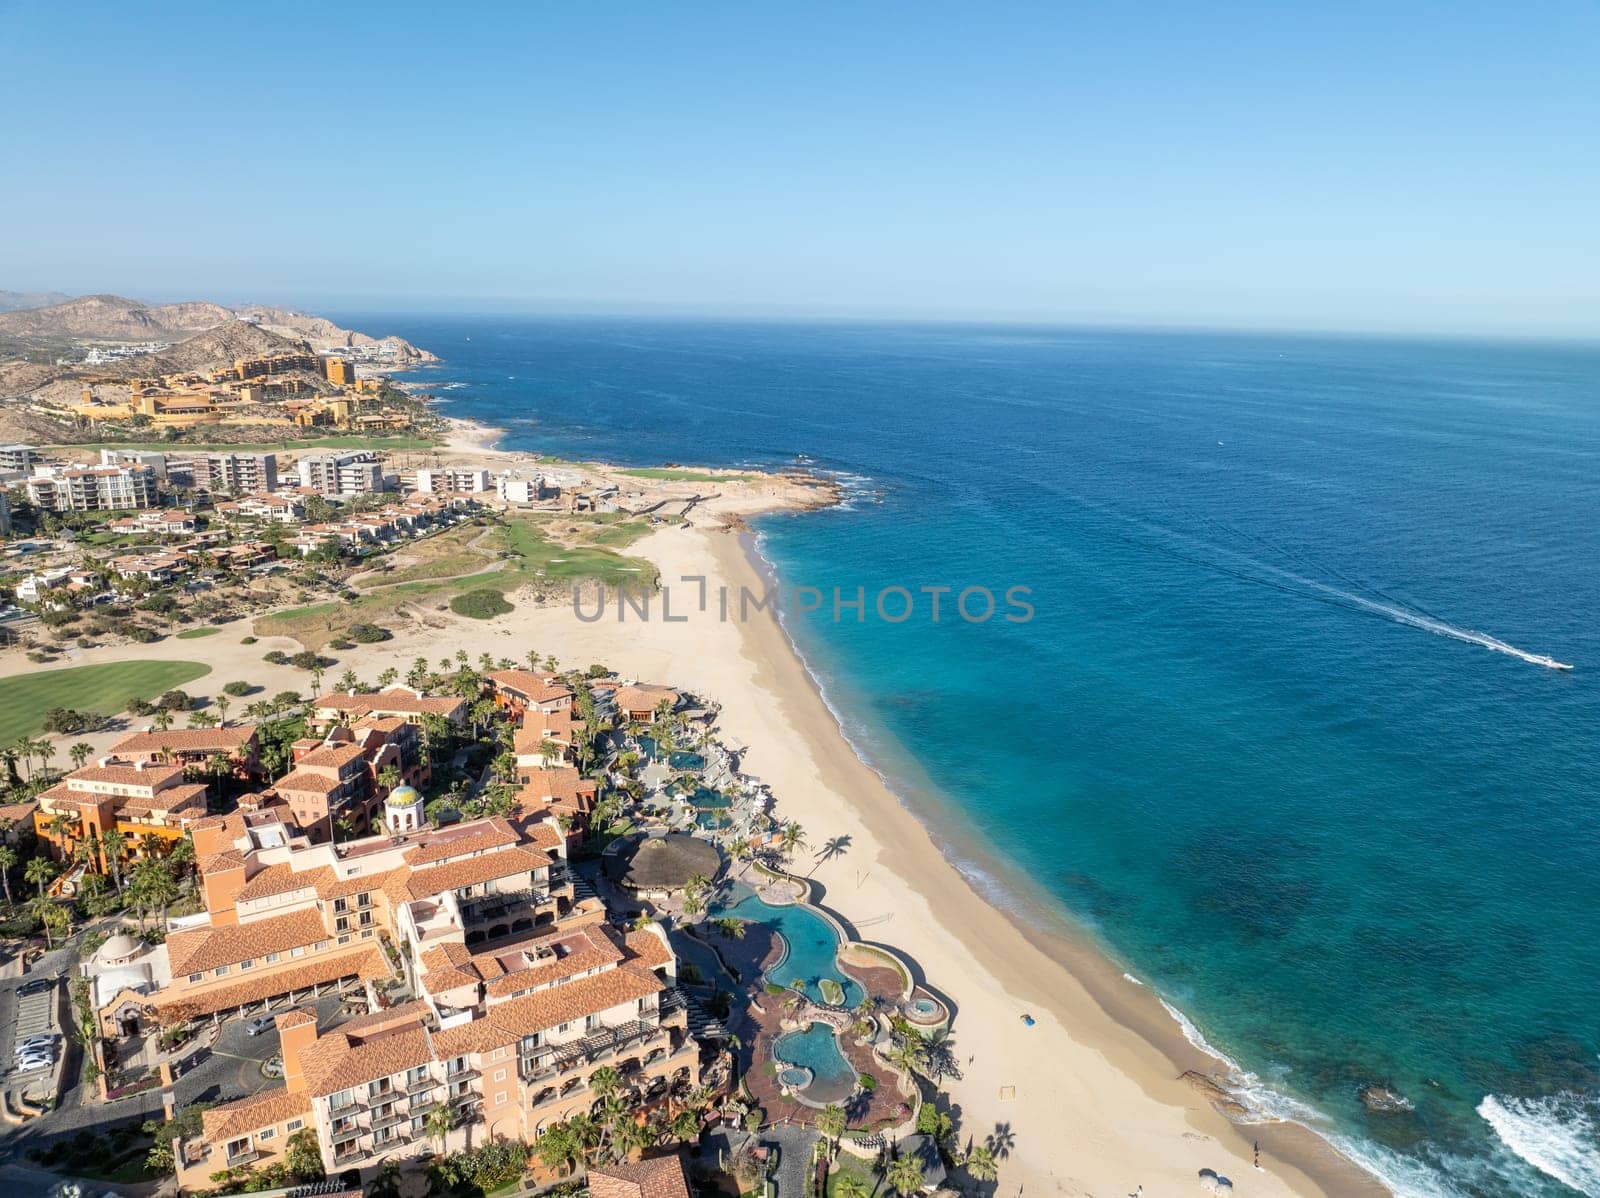 Aerial view of tropical beach with resorts in Cabo San Jose, Baja California Sur, Mexico